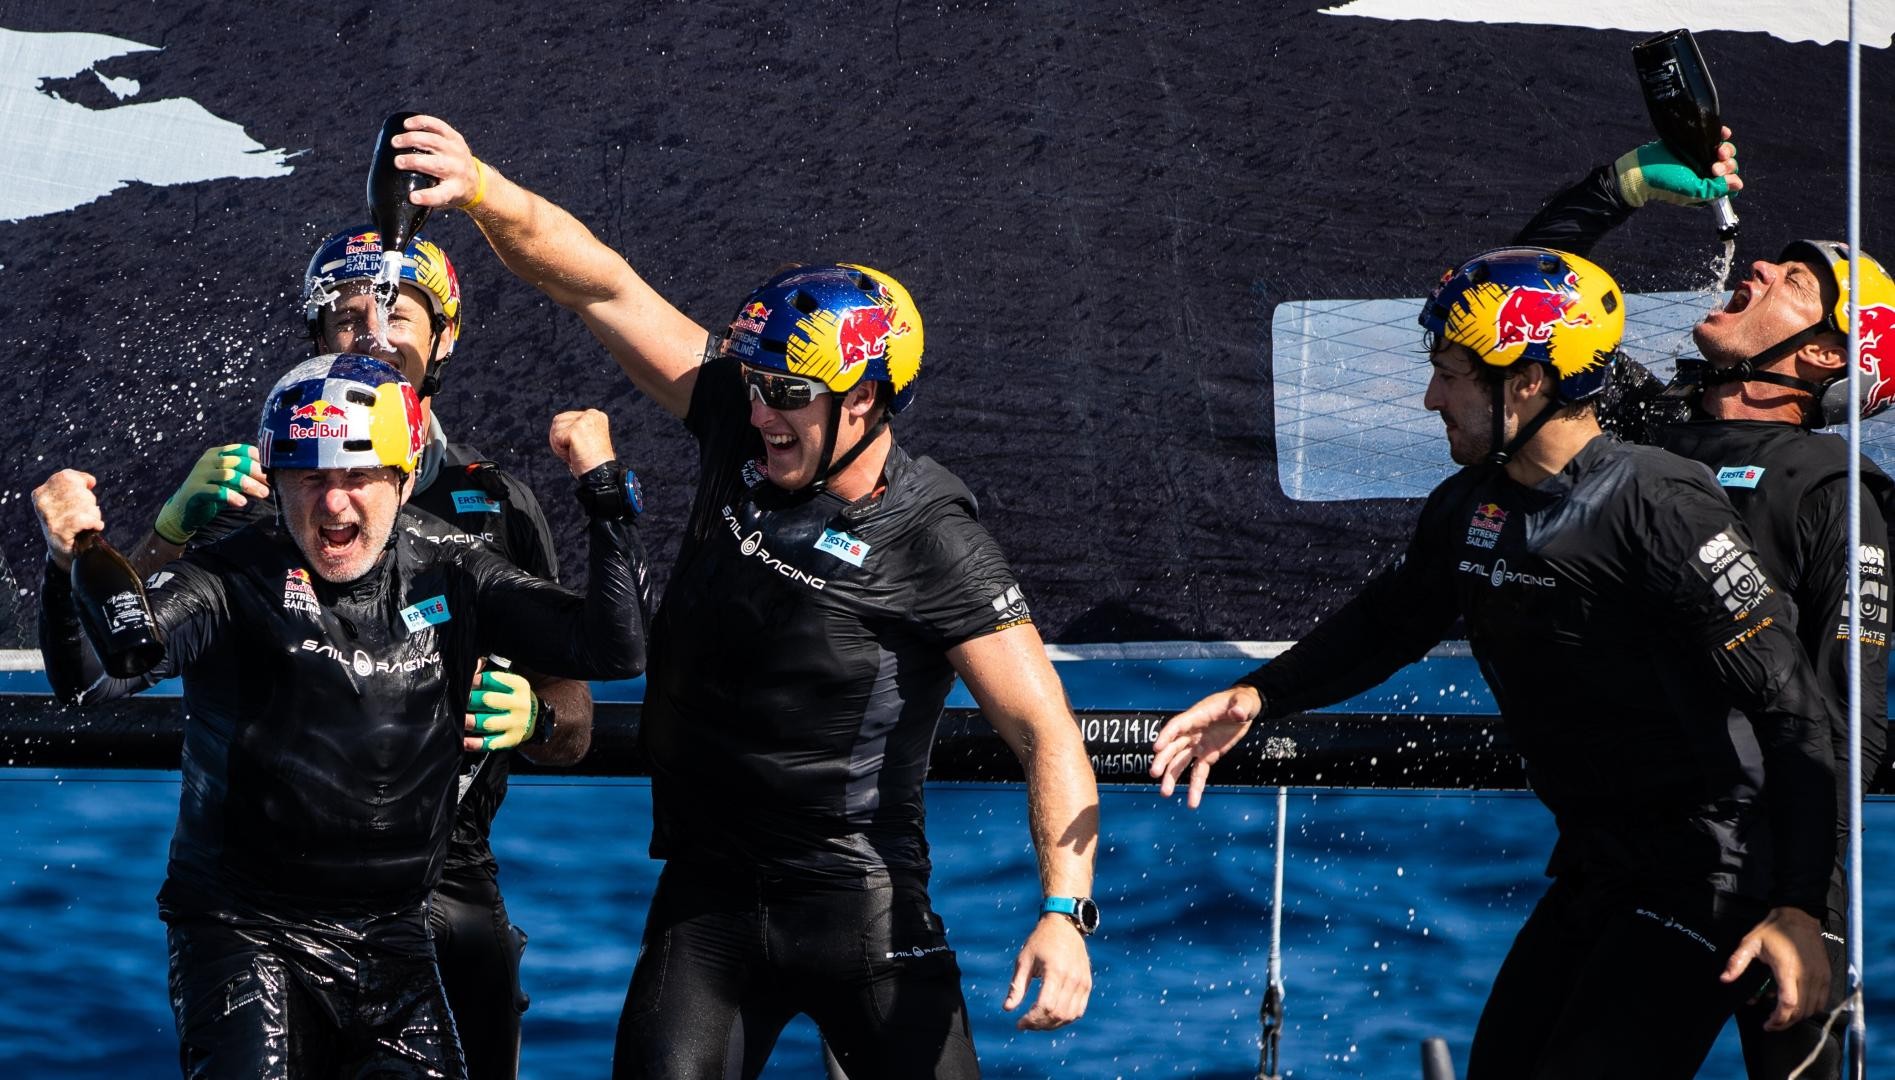 Celebrations on board Red Bull Sailing Team, as Hagara and Steinacher claim their first World Champion in 22 years. Photo: GC32 Racing Tour / Sailing Energy